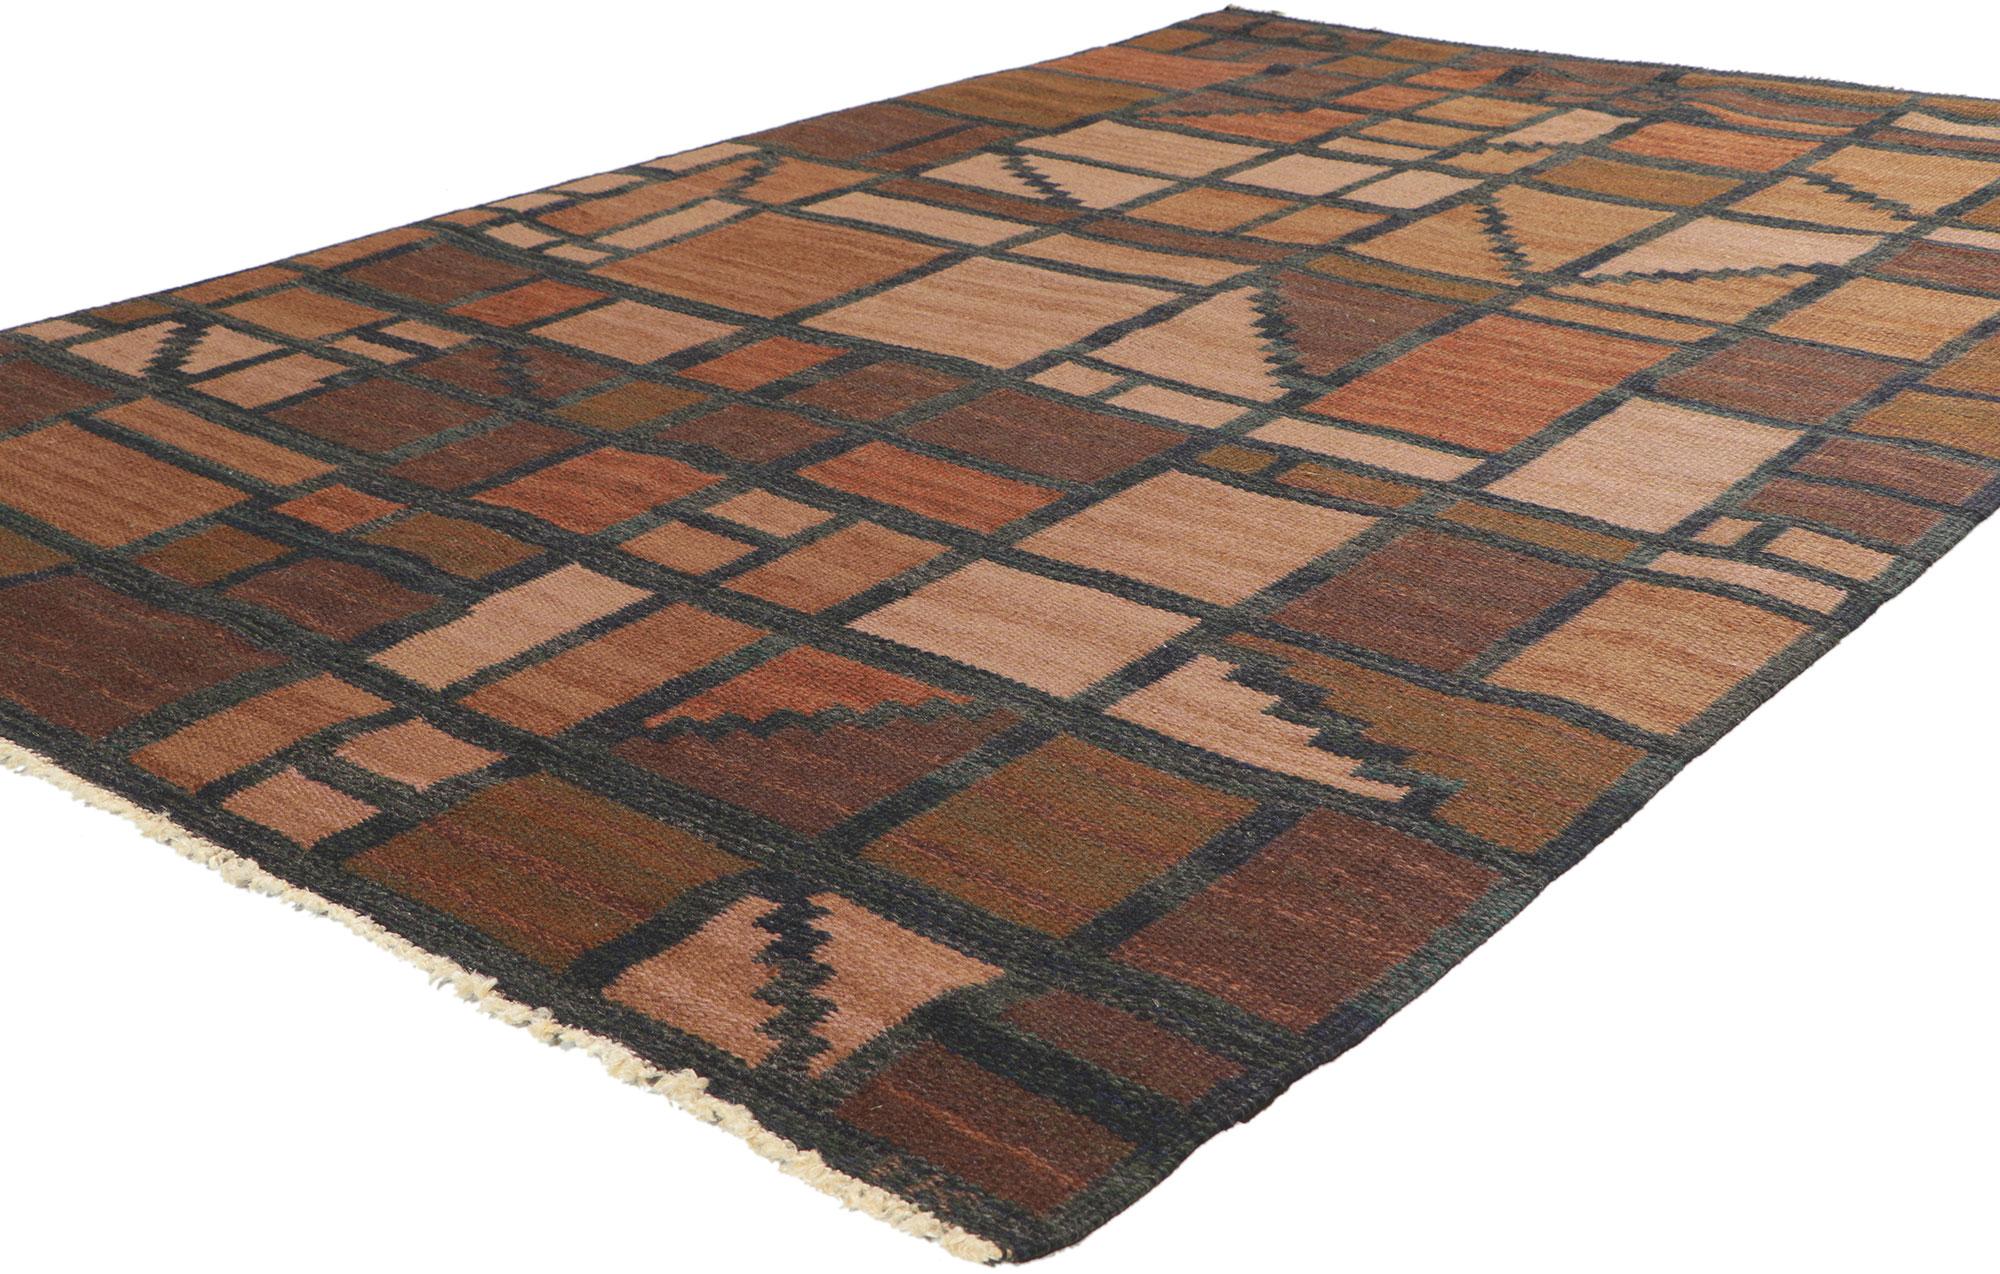 78485 Vintage Swedish Rollakan Rug by Irma Kronlund, 04'11 x 07'02.
?Reflecting well-balanced asymmetry with incredible detail and texture, this handwoven wool Swedish rollakan rug is a captivating vision of woven beauty. The eye-catching geometric